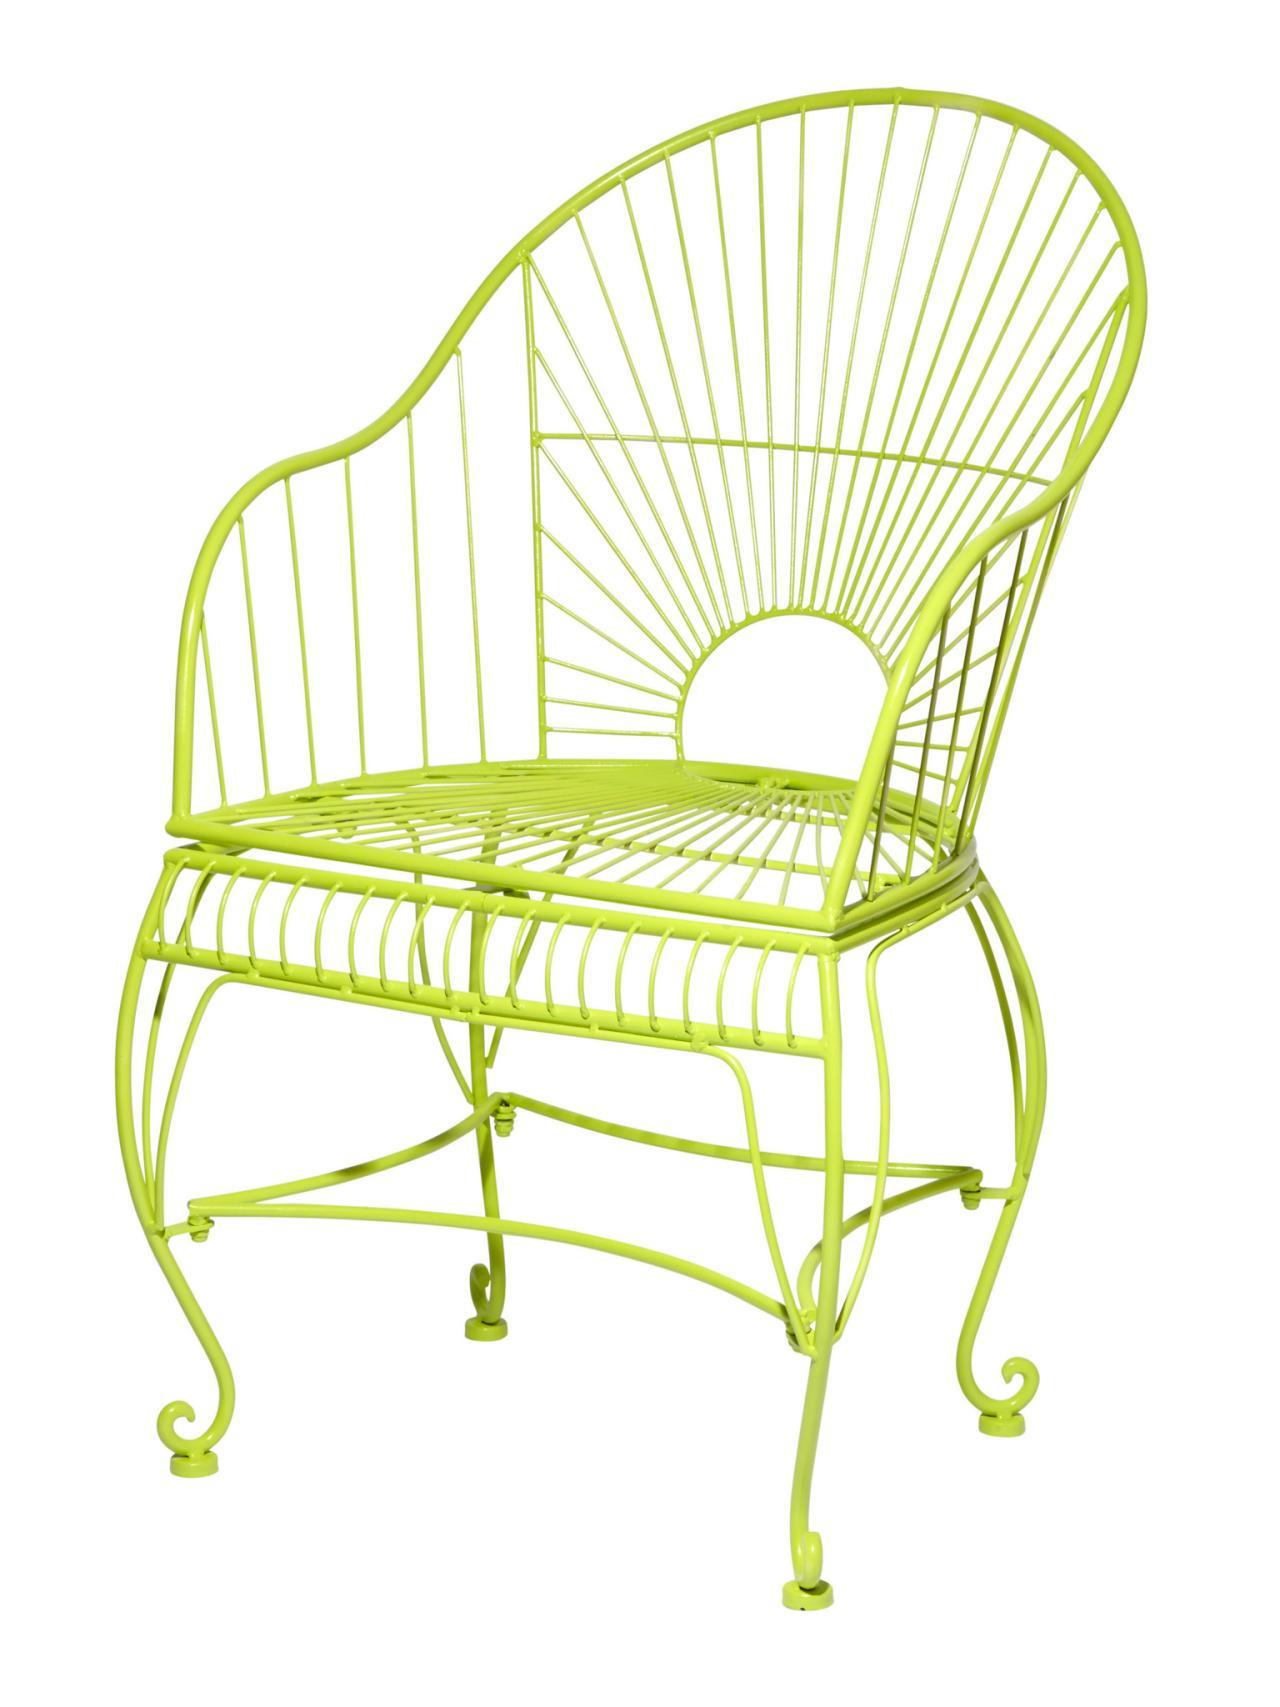 How To Paint Wrought Iron Furniture, What Is The Best Paint For Wrought Iron Furniture